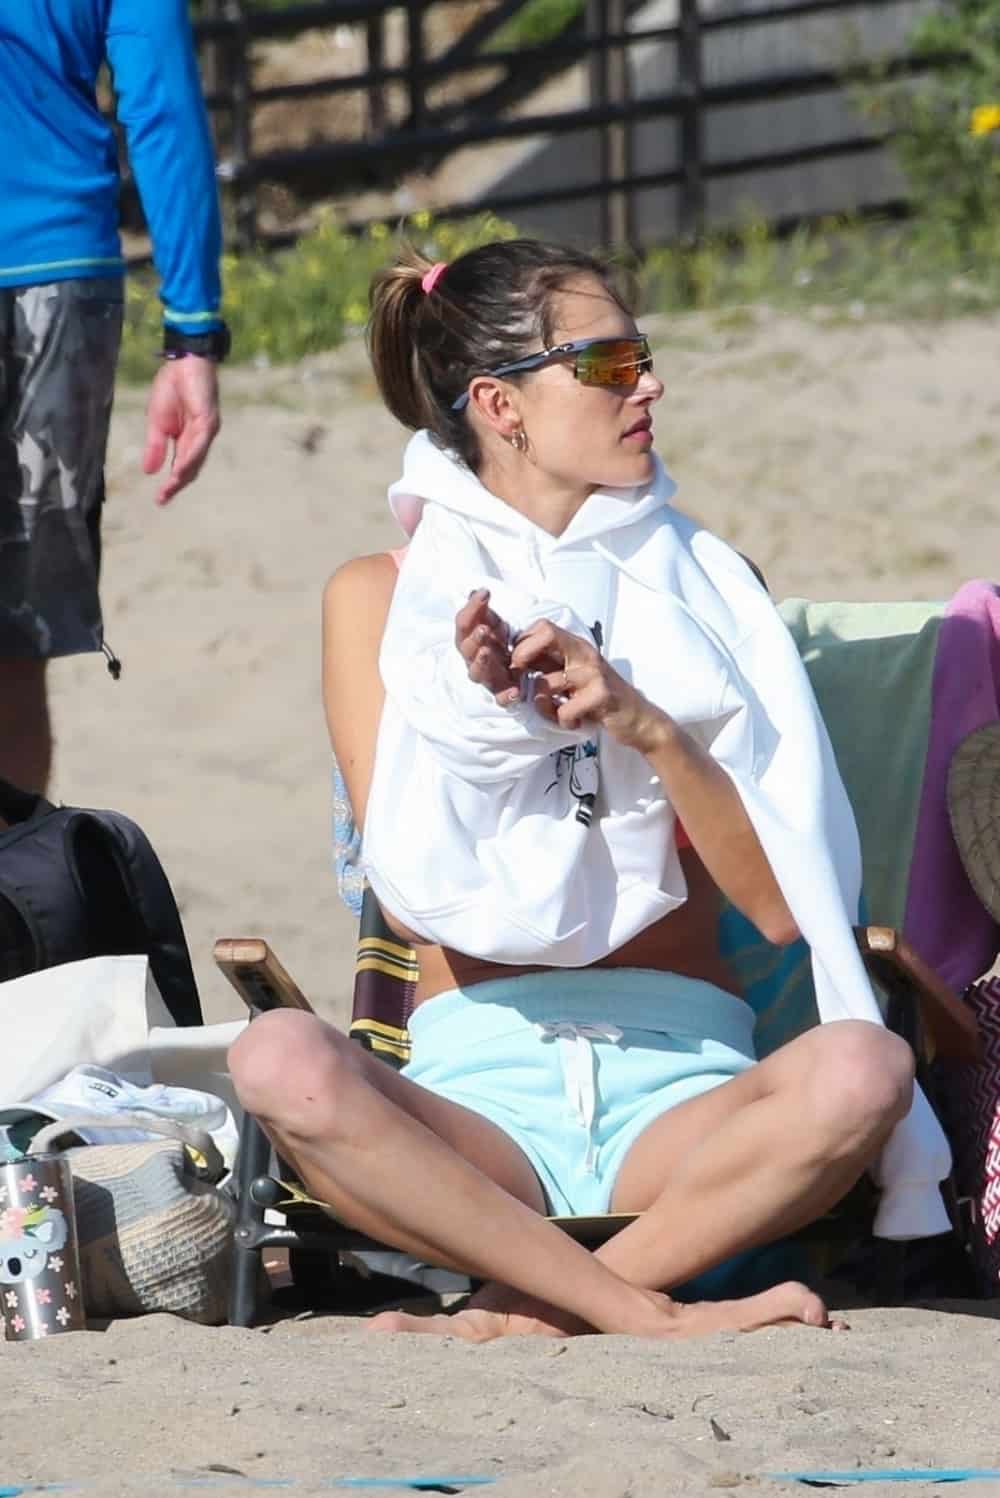 Alessandra Ambrosio Looked Gorgeous with a Group of Friends at the Beach